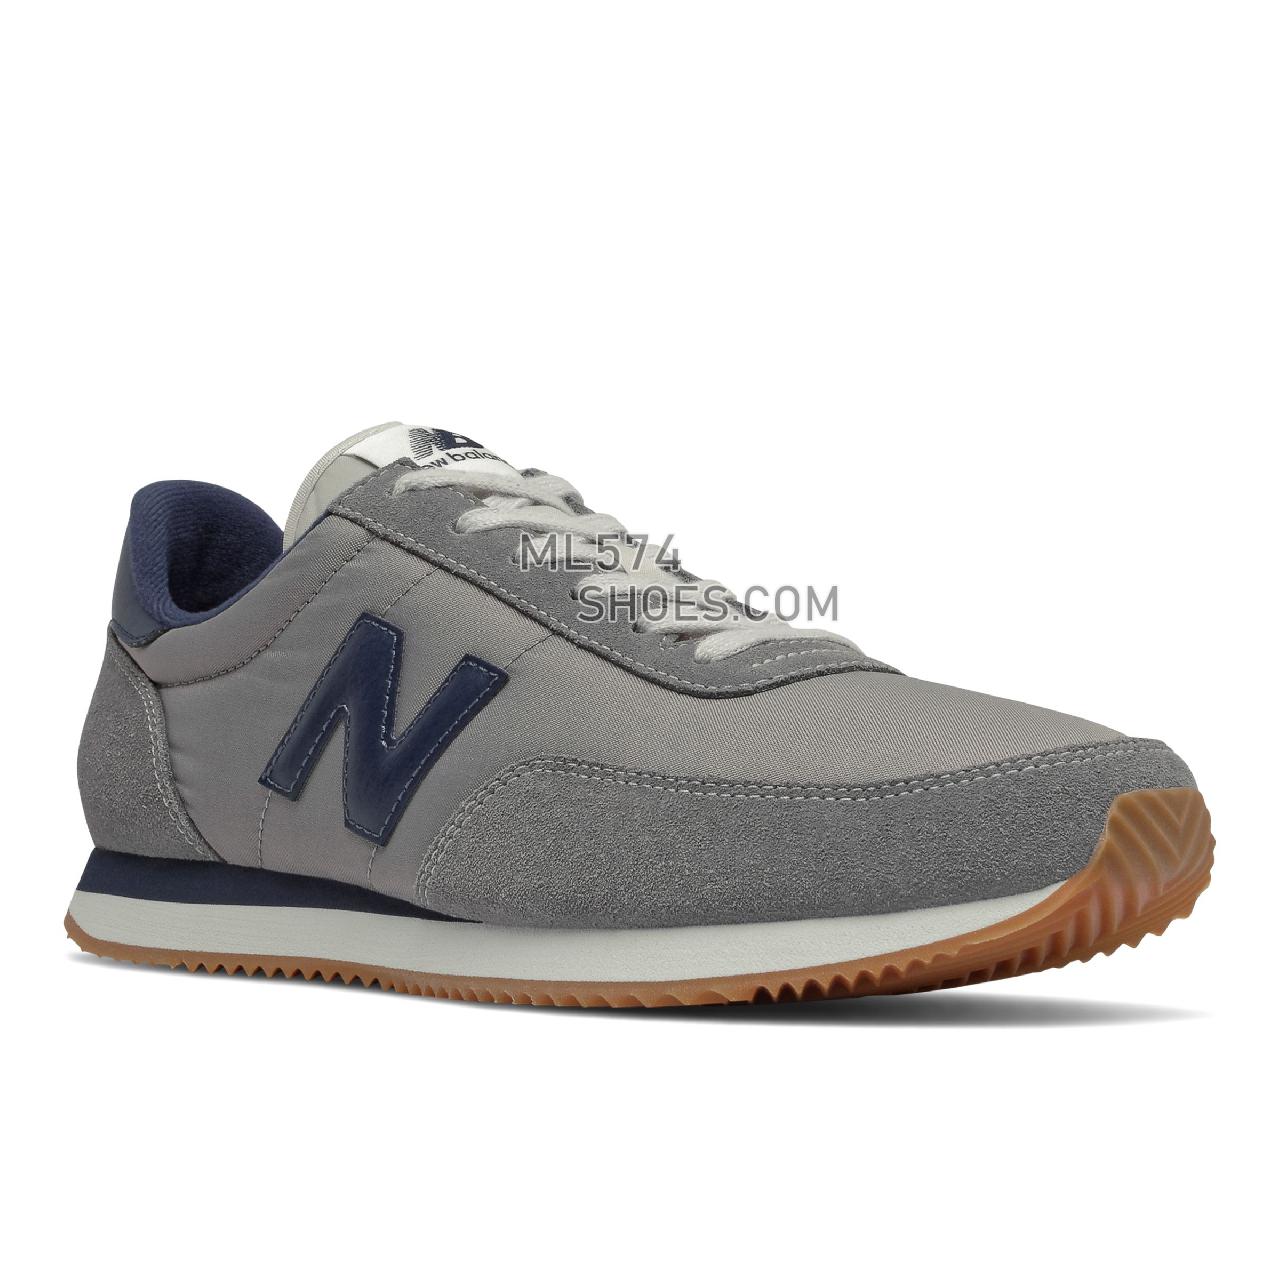 New Balance UL720V1 - Unisex Men's Women's Classic Sneakers - Marblehead with Eclipse - UL720VD1